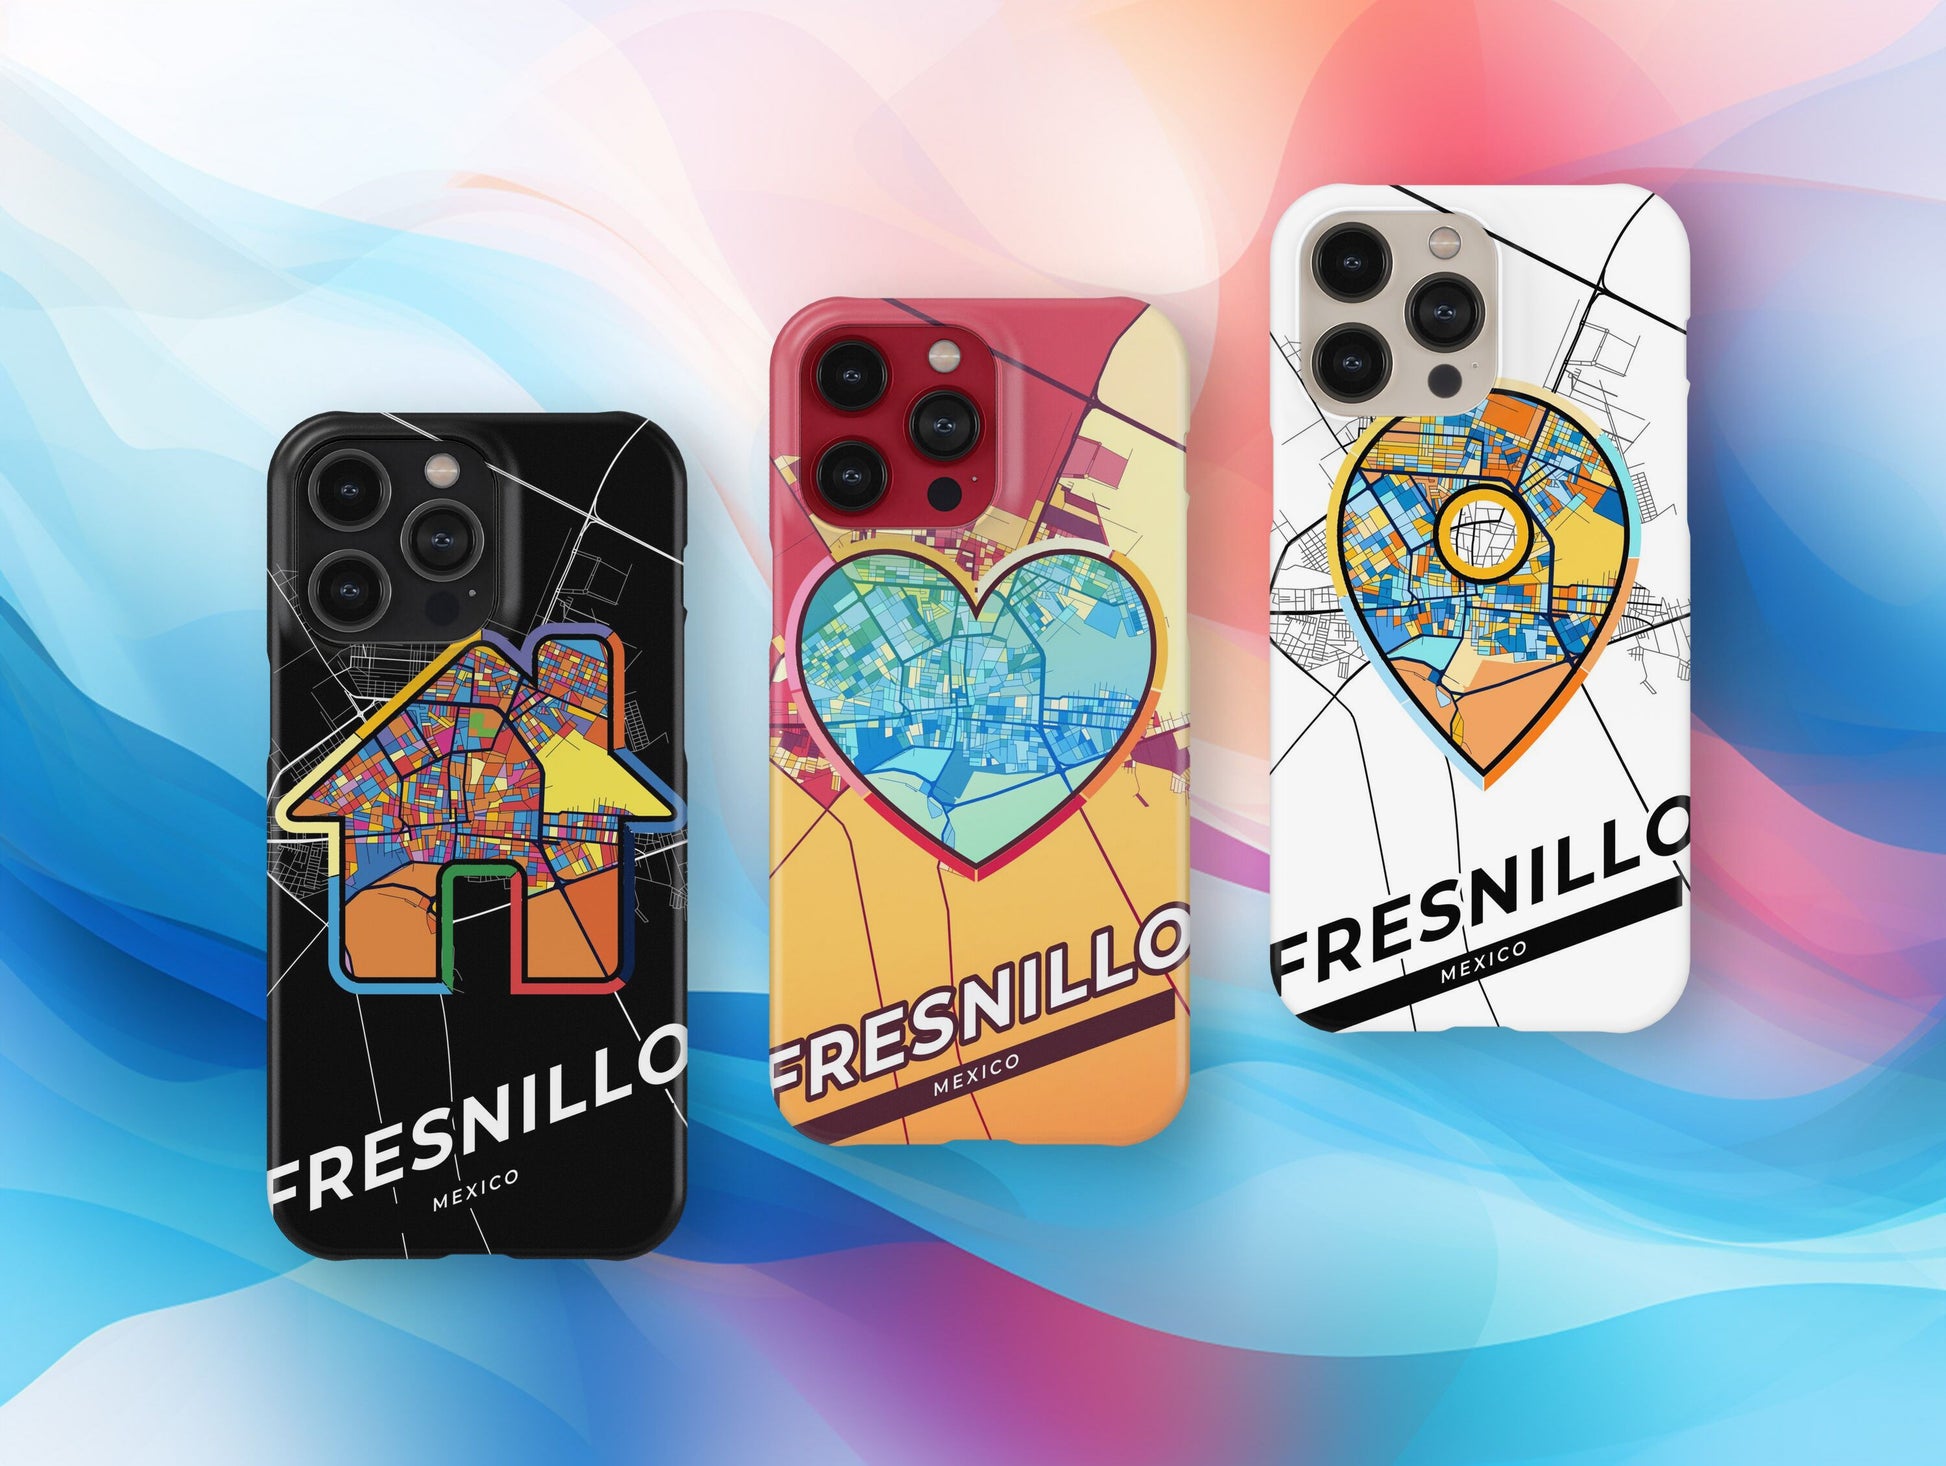 Fresnillo Mexico slim phone case with colorful icon. Birthday, wedding or housewarming gift. Couple match cases.